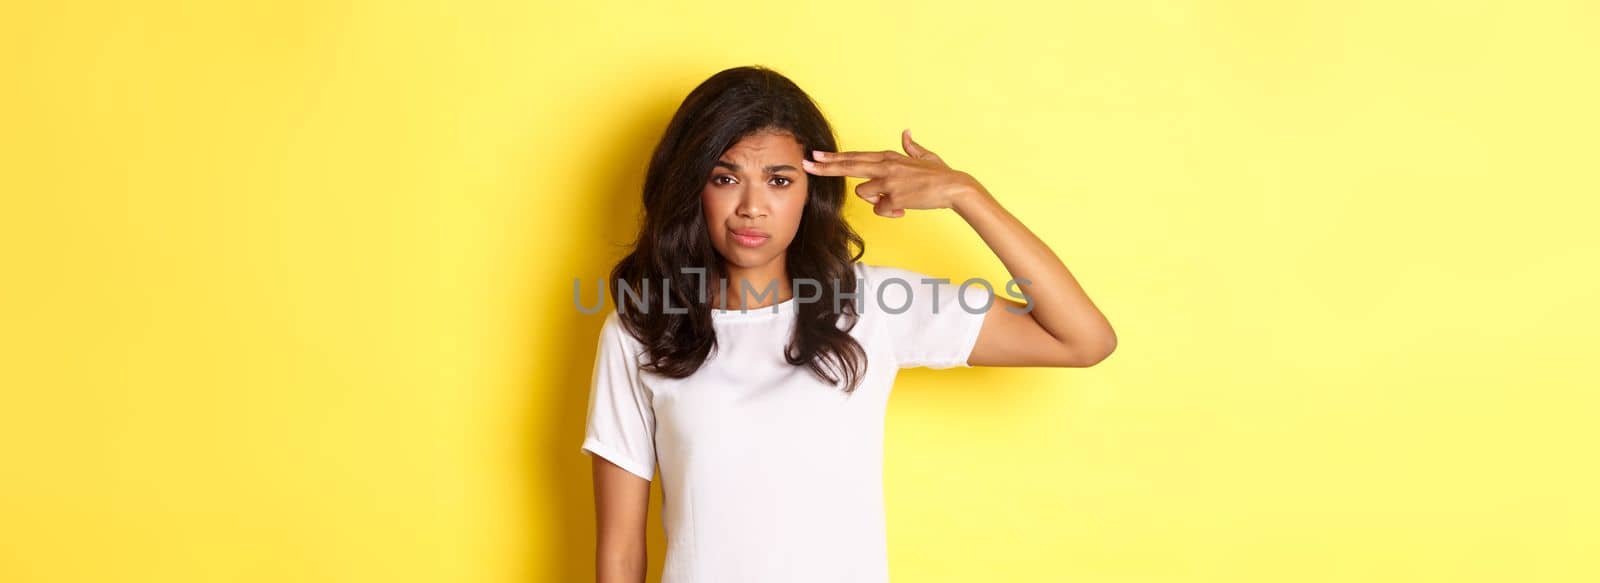 Portrait of skeptical and bothered african-american woman, making finger gun sign over head and smirking unamused, standing over yellow background.